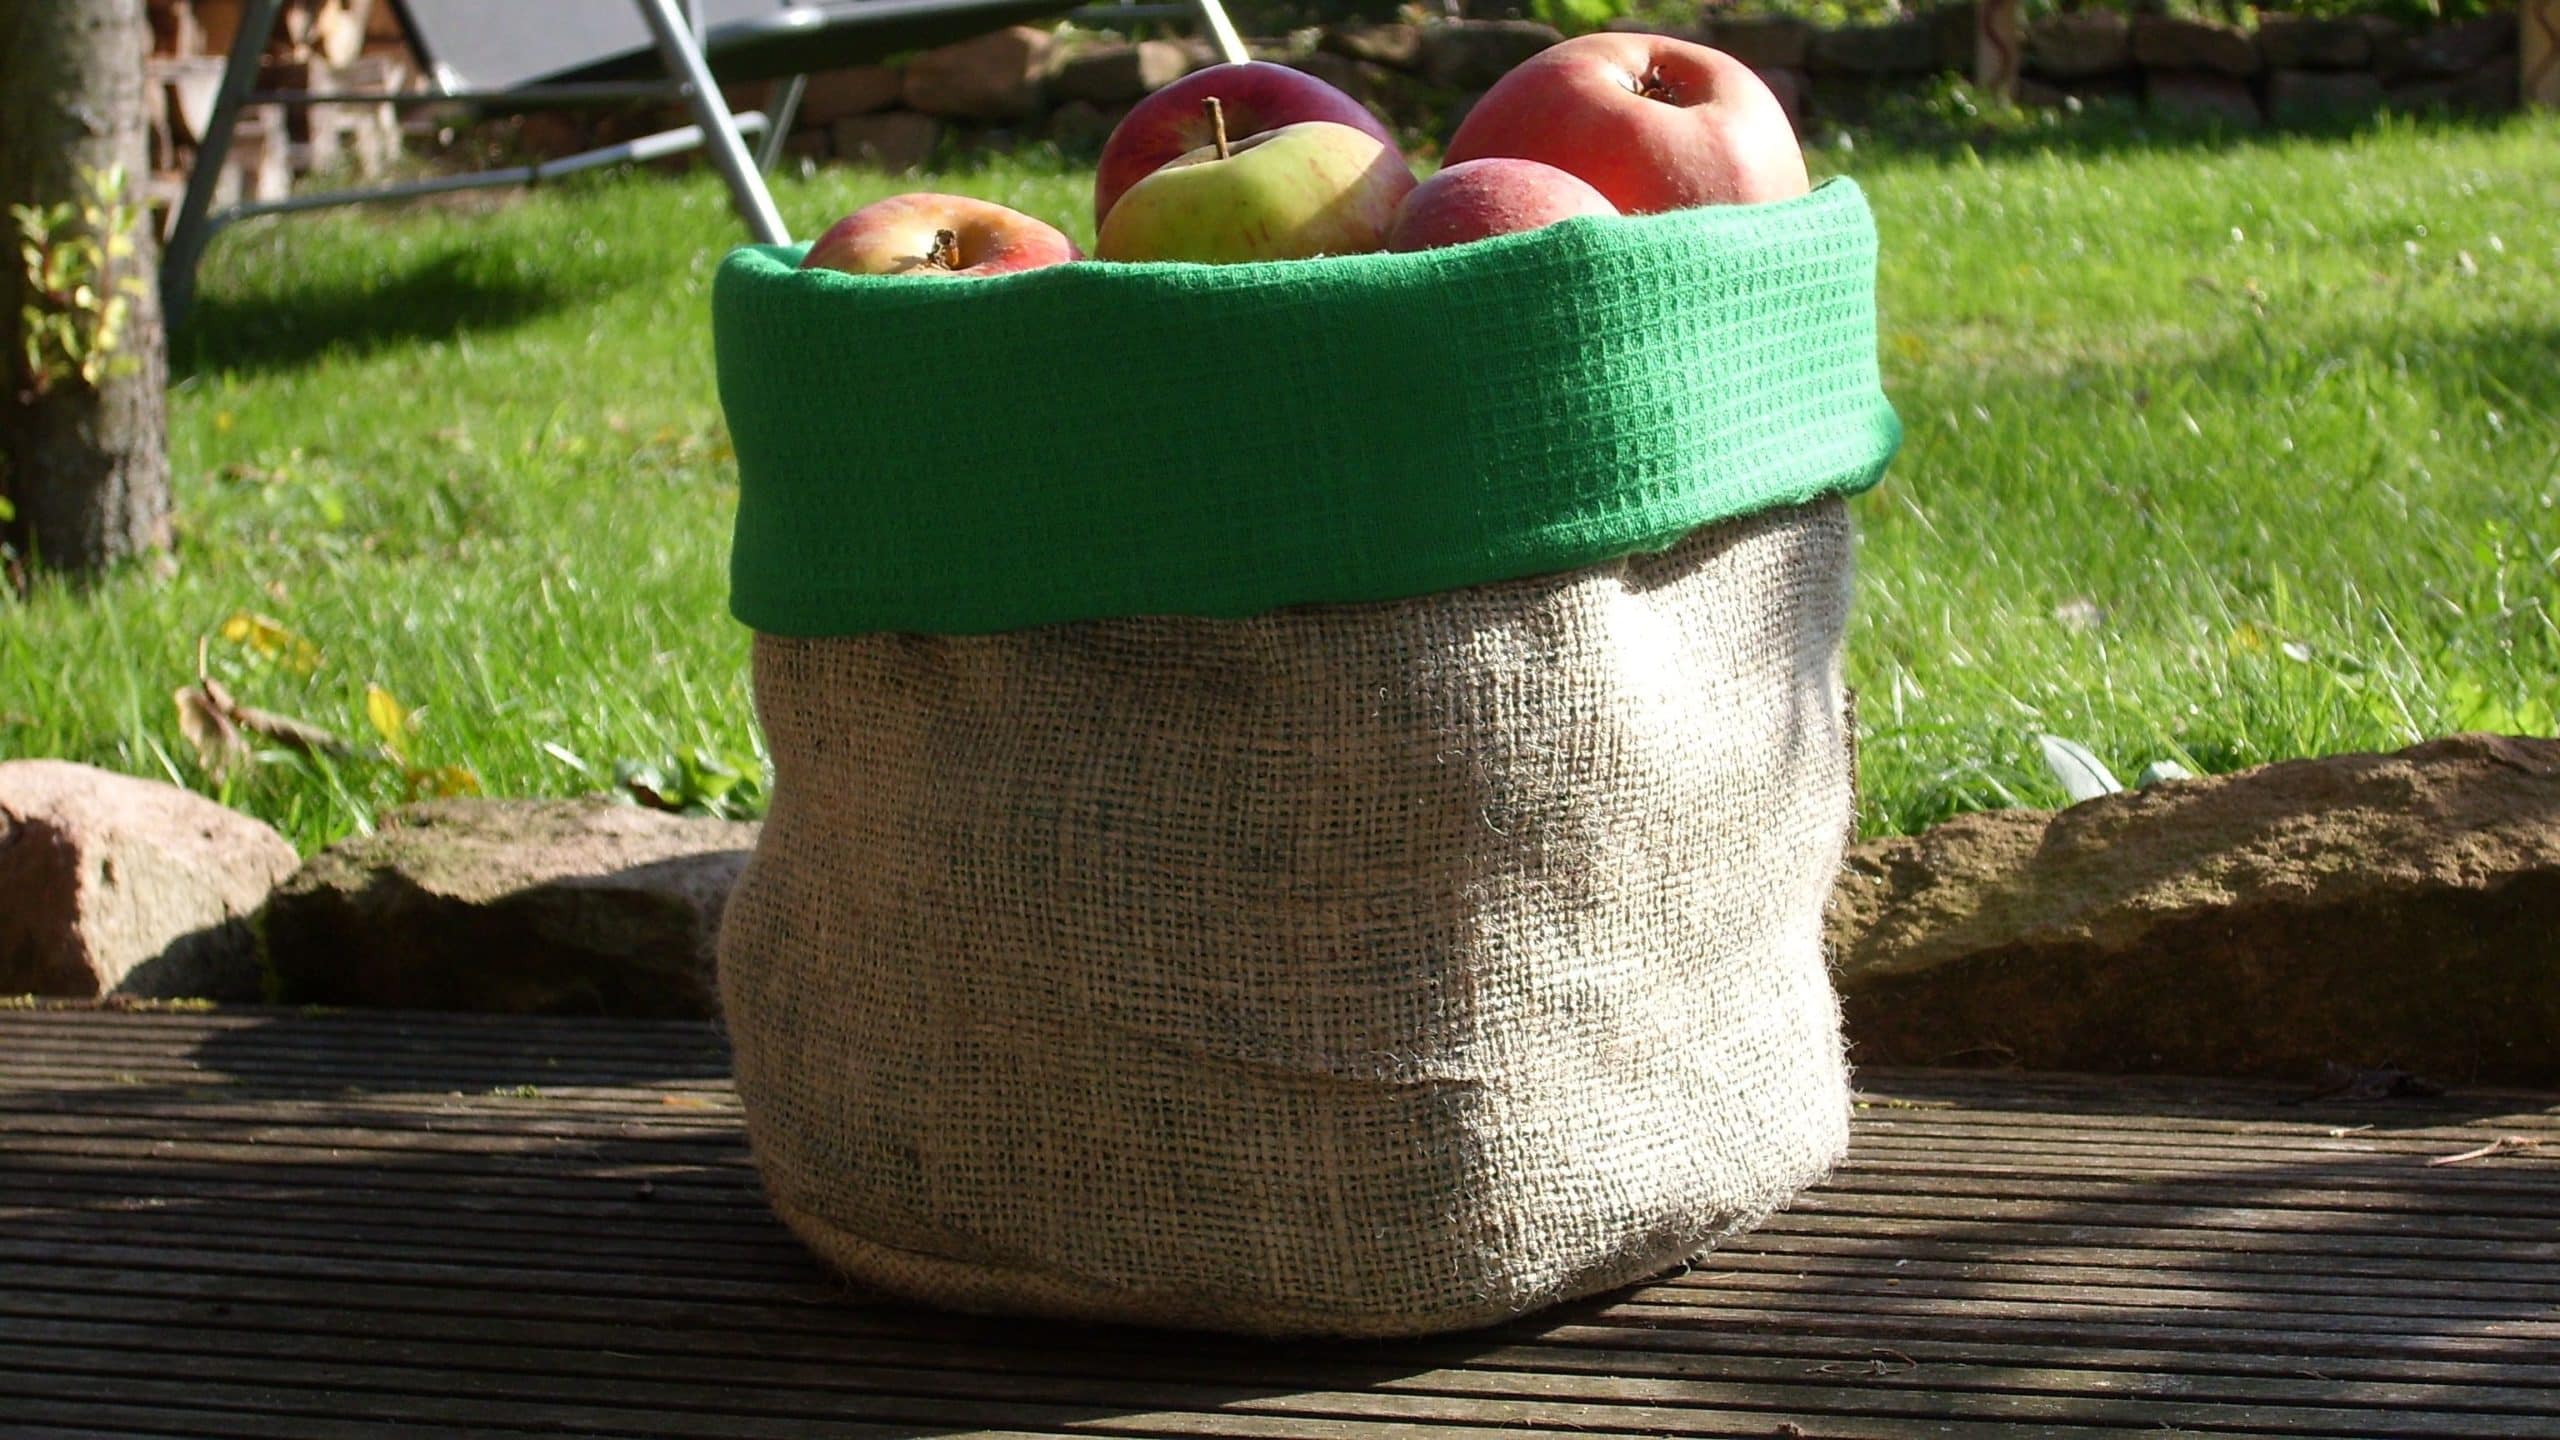 jute bag filled with apples